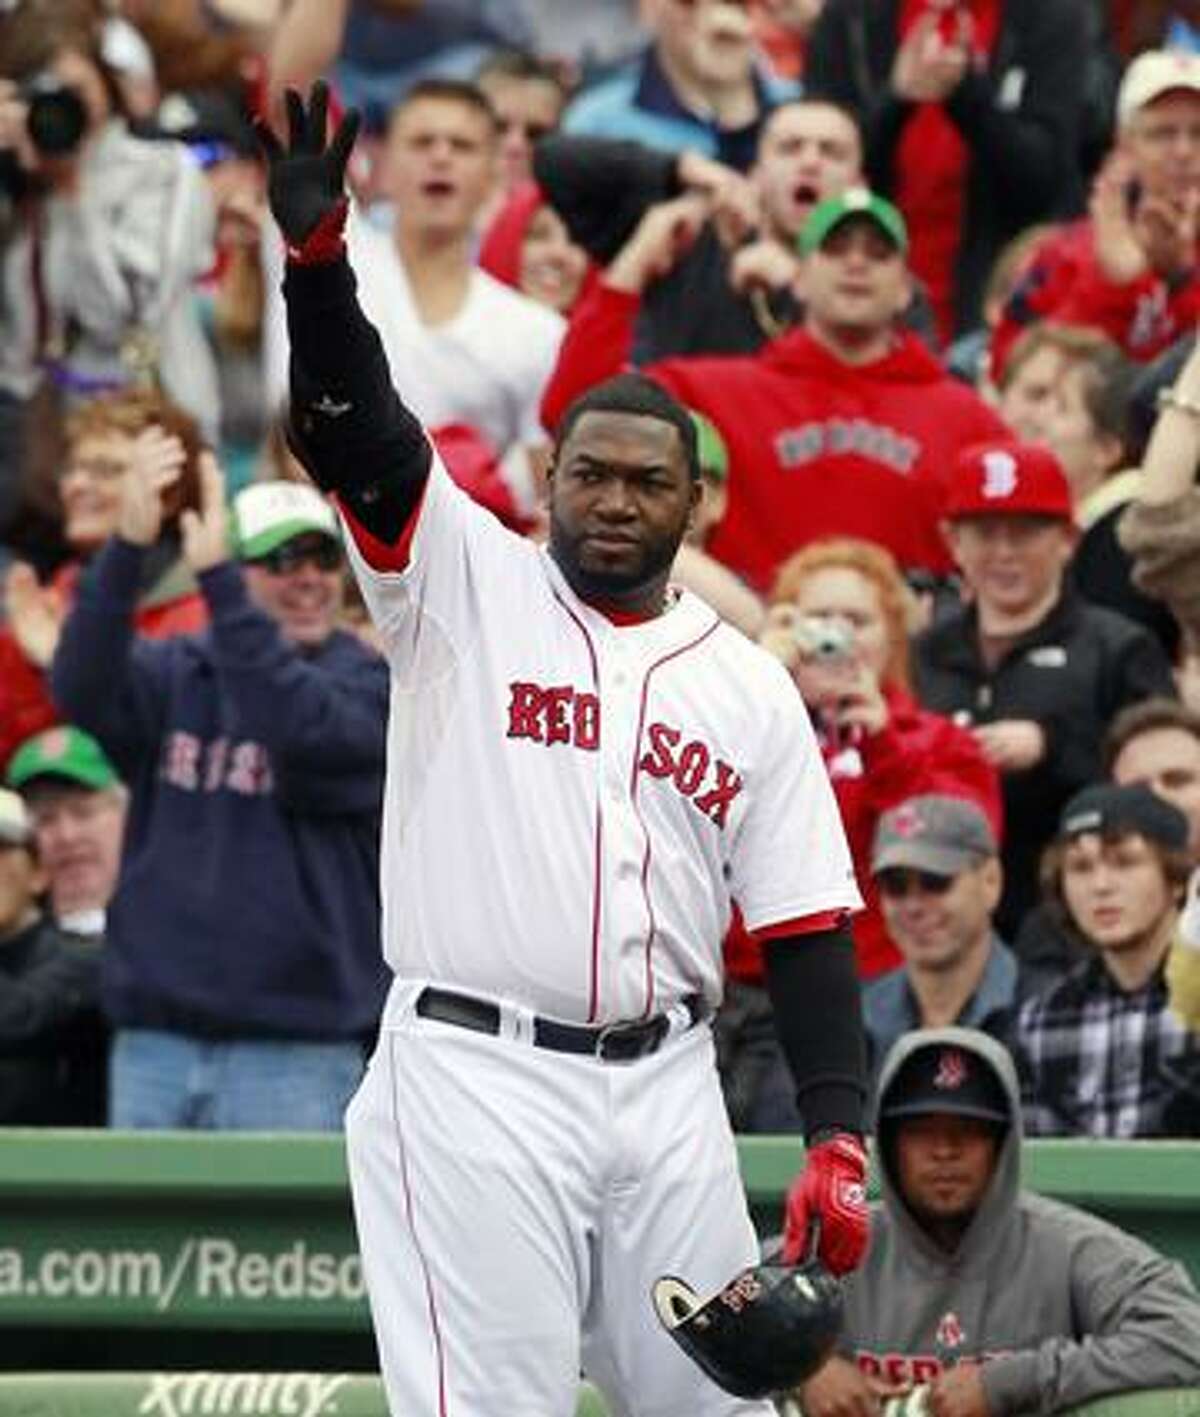 Boston Red Sox's David Ortiz waves to the crowd as he leaves a baseball game against the New York Yankees in the sixth inning, Sunday in Boston. (AP Photo/Michael Dwyer)